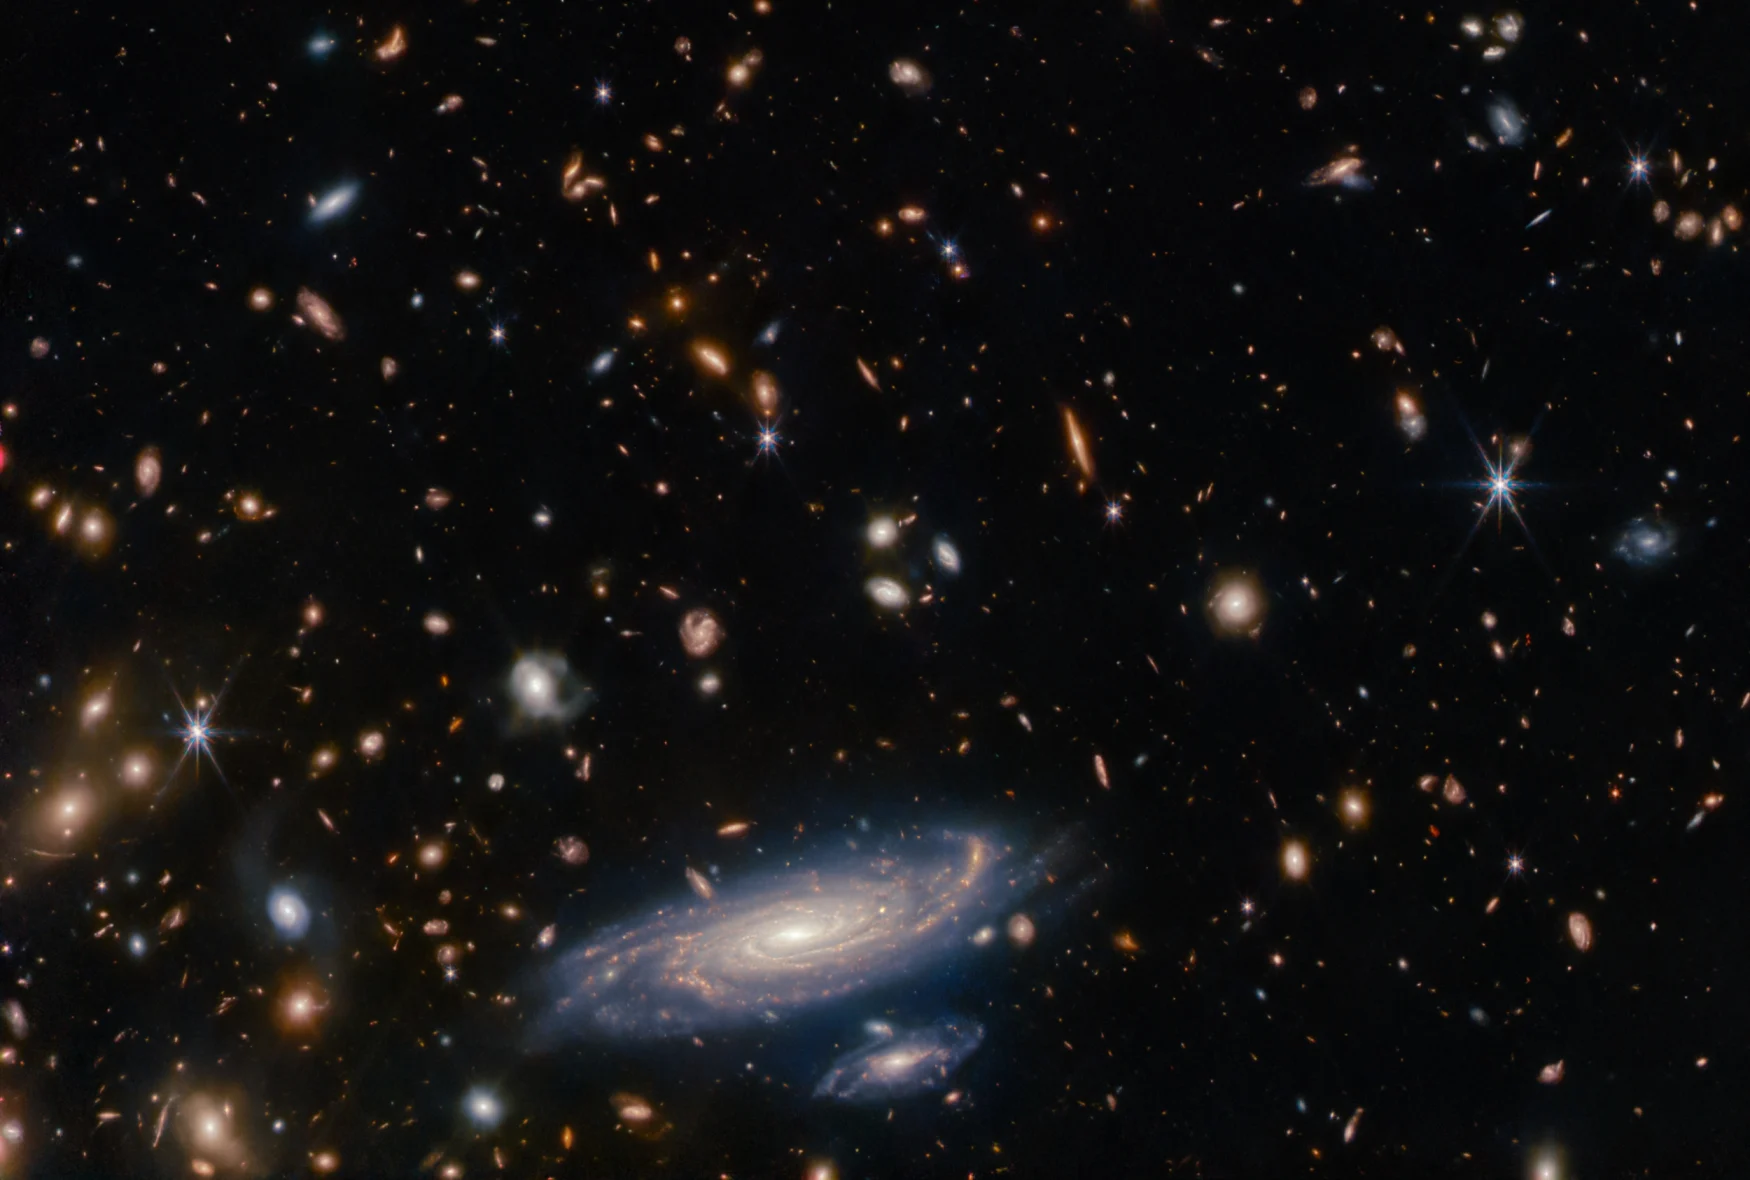 Image that was taken with the James Webb Space Telescope showing a spiral galaxy at the bottom center, surrounded by more distant galaxies (appearing as blobs) and individual stars.